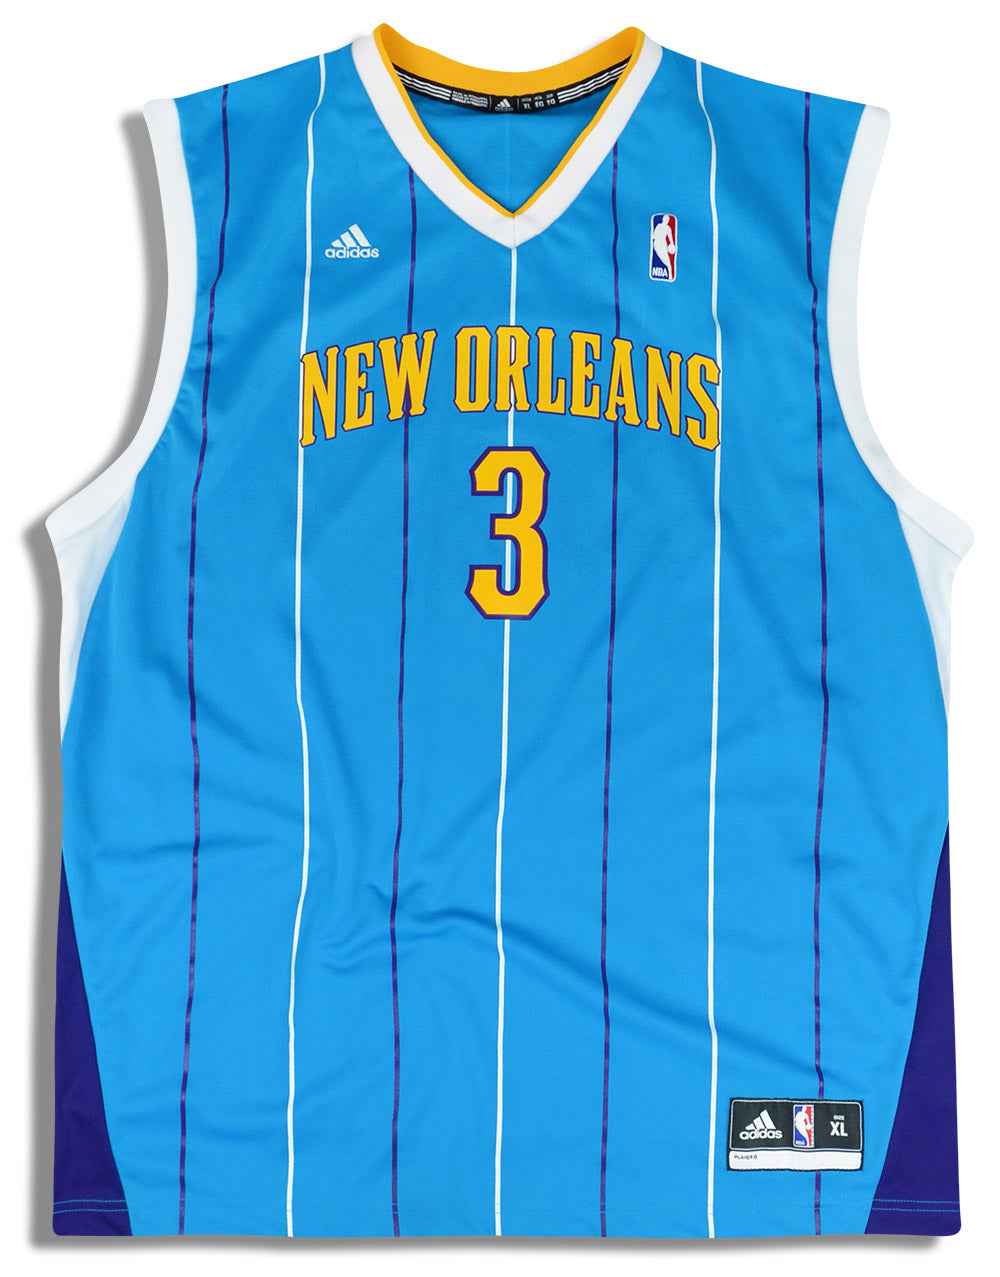 Chris Paul New Orleans Hornets Authentic Adidas Game Jersey NEW